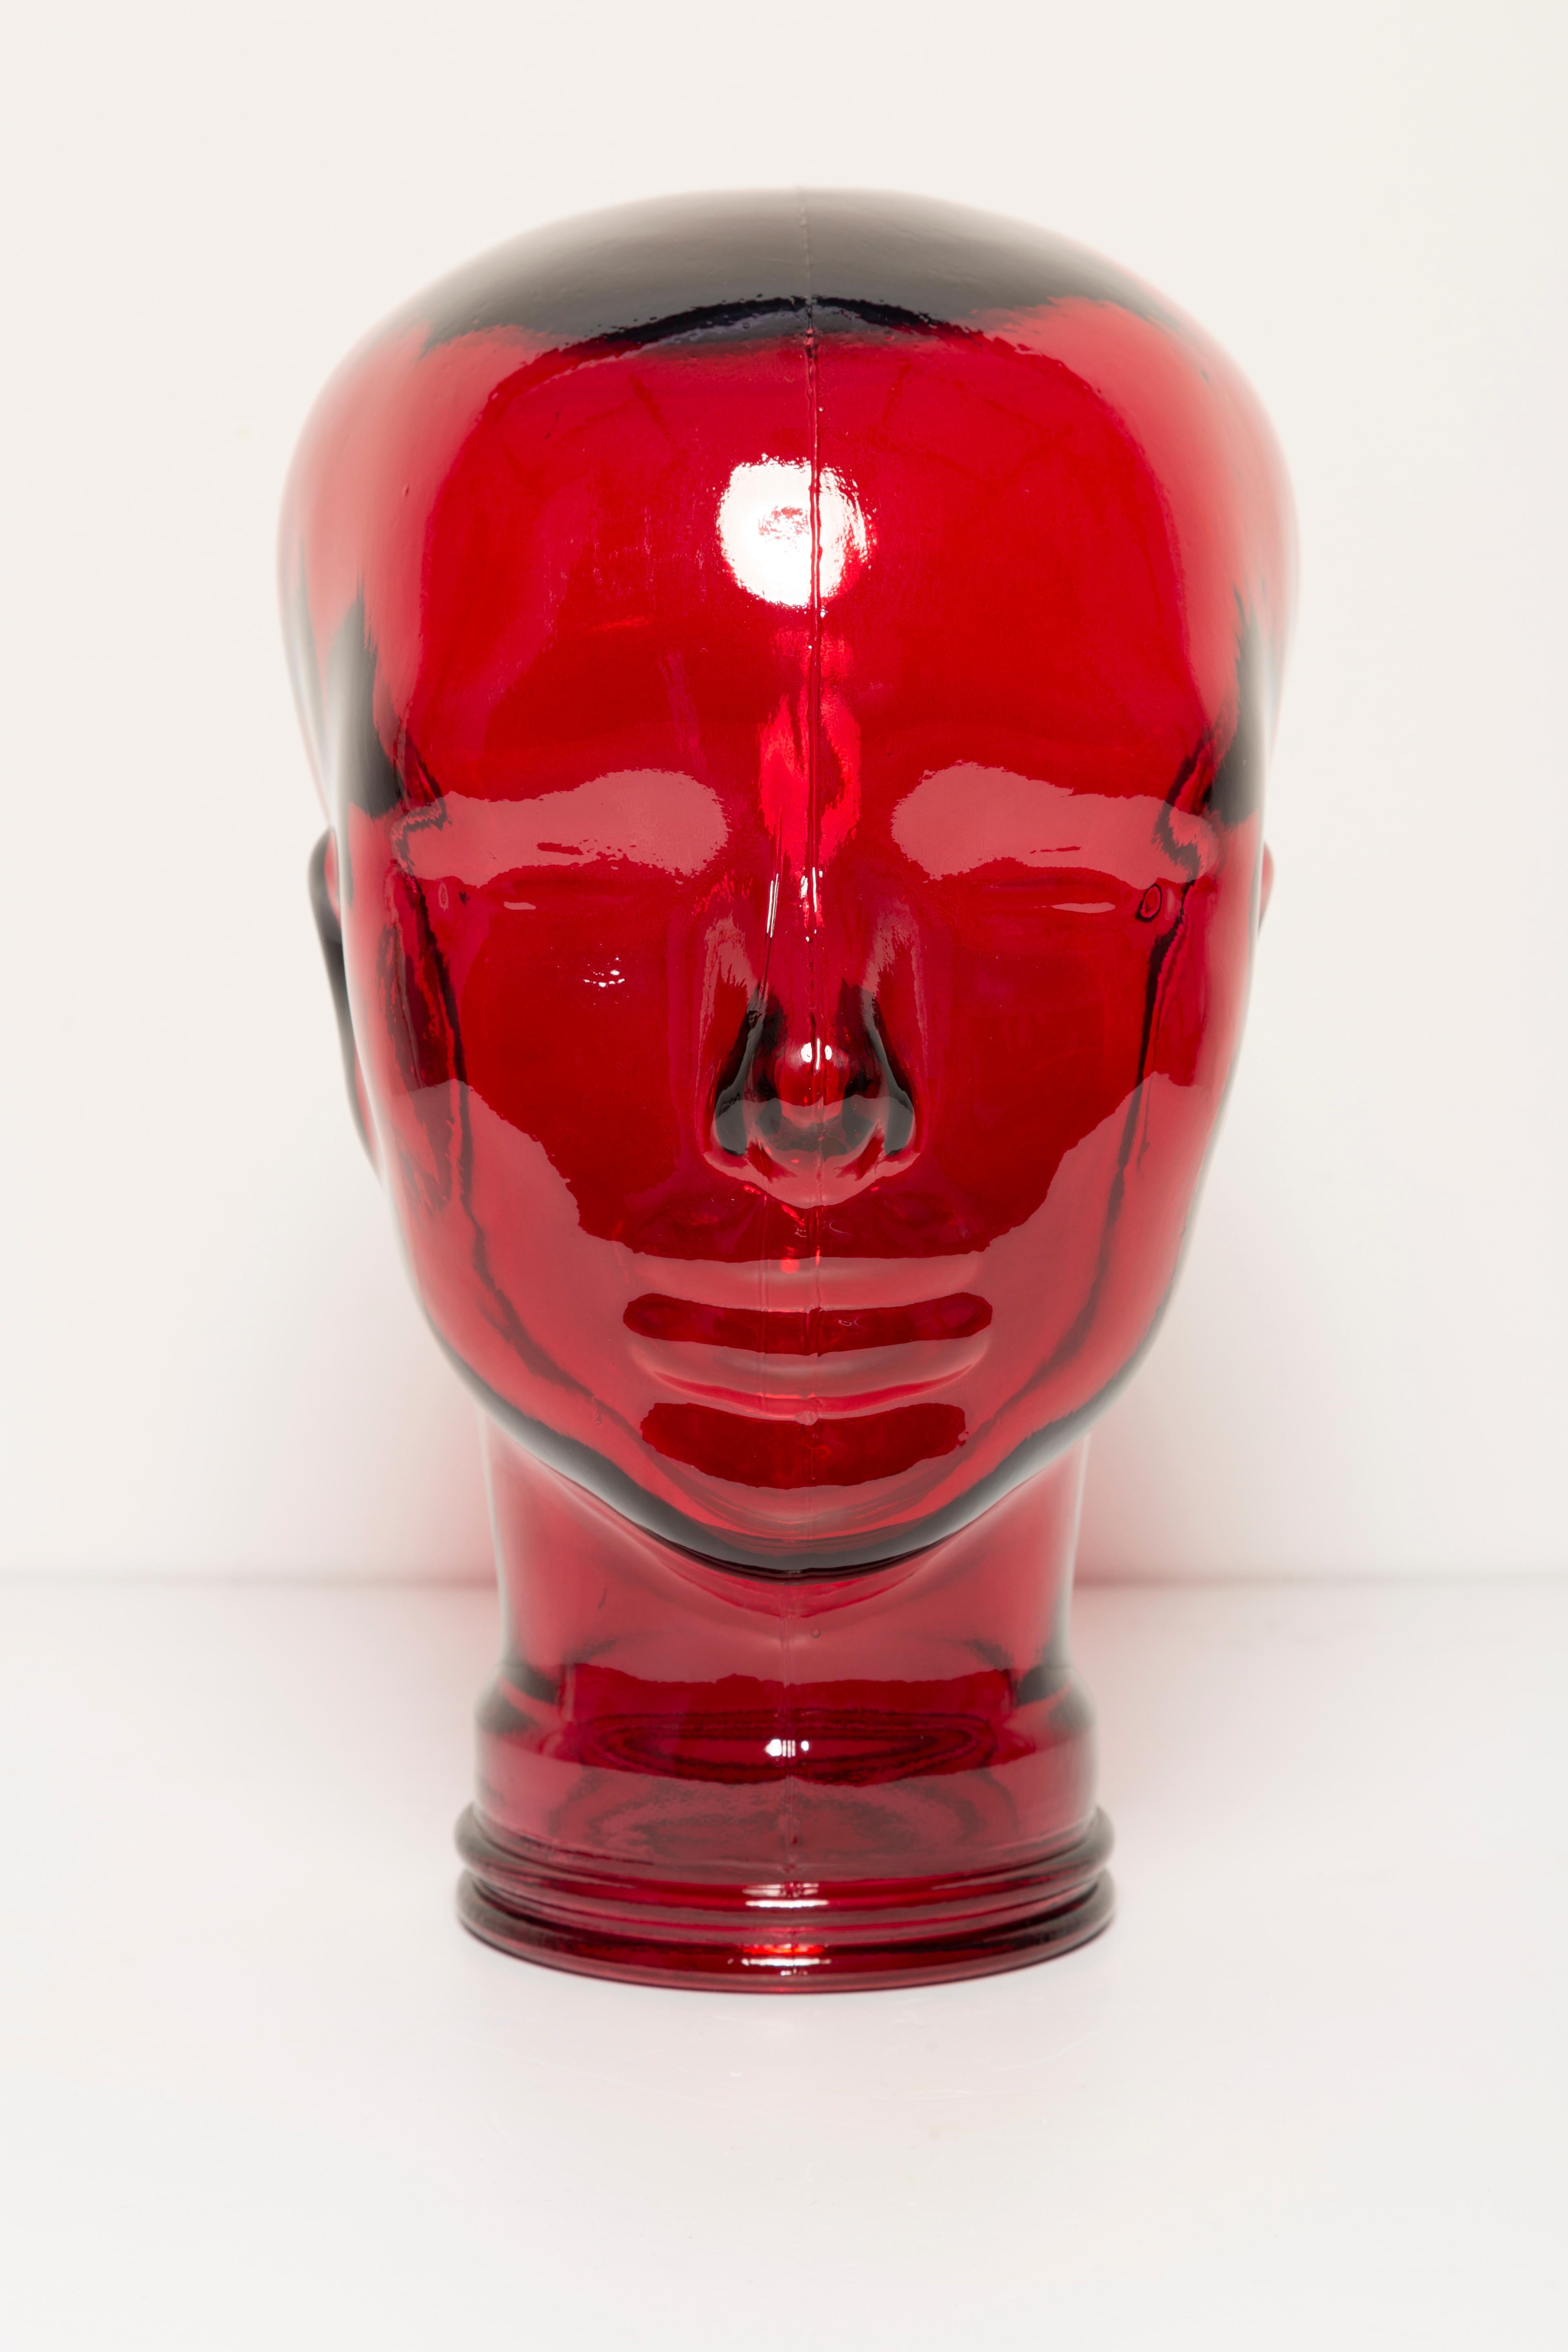 Life-size glass head in a unique red color. Produced in a German steelworks in the 1970s. Perfect condition. A perfect addition to the interior, photo prop, display or headphone stand.